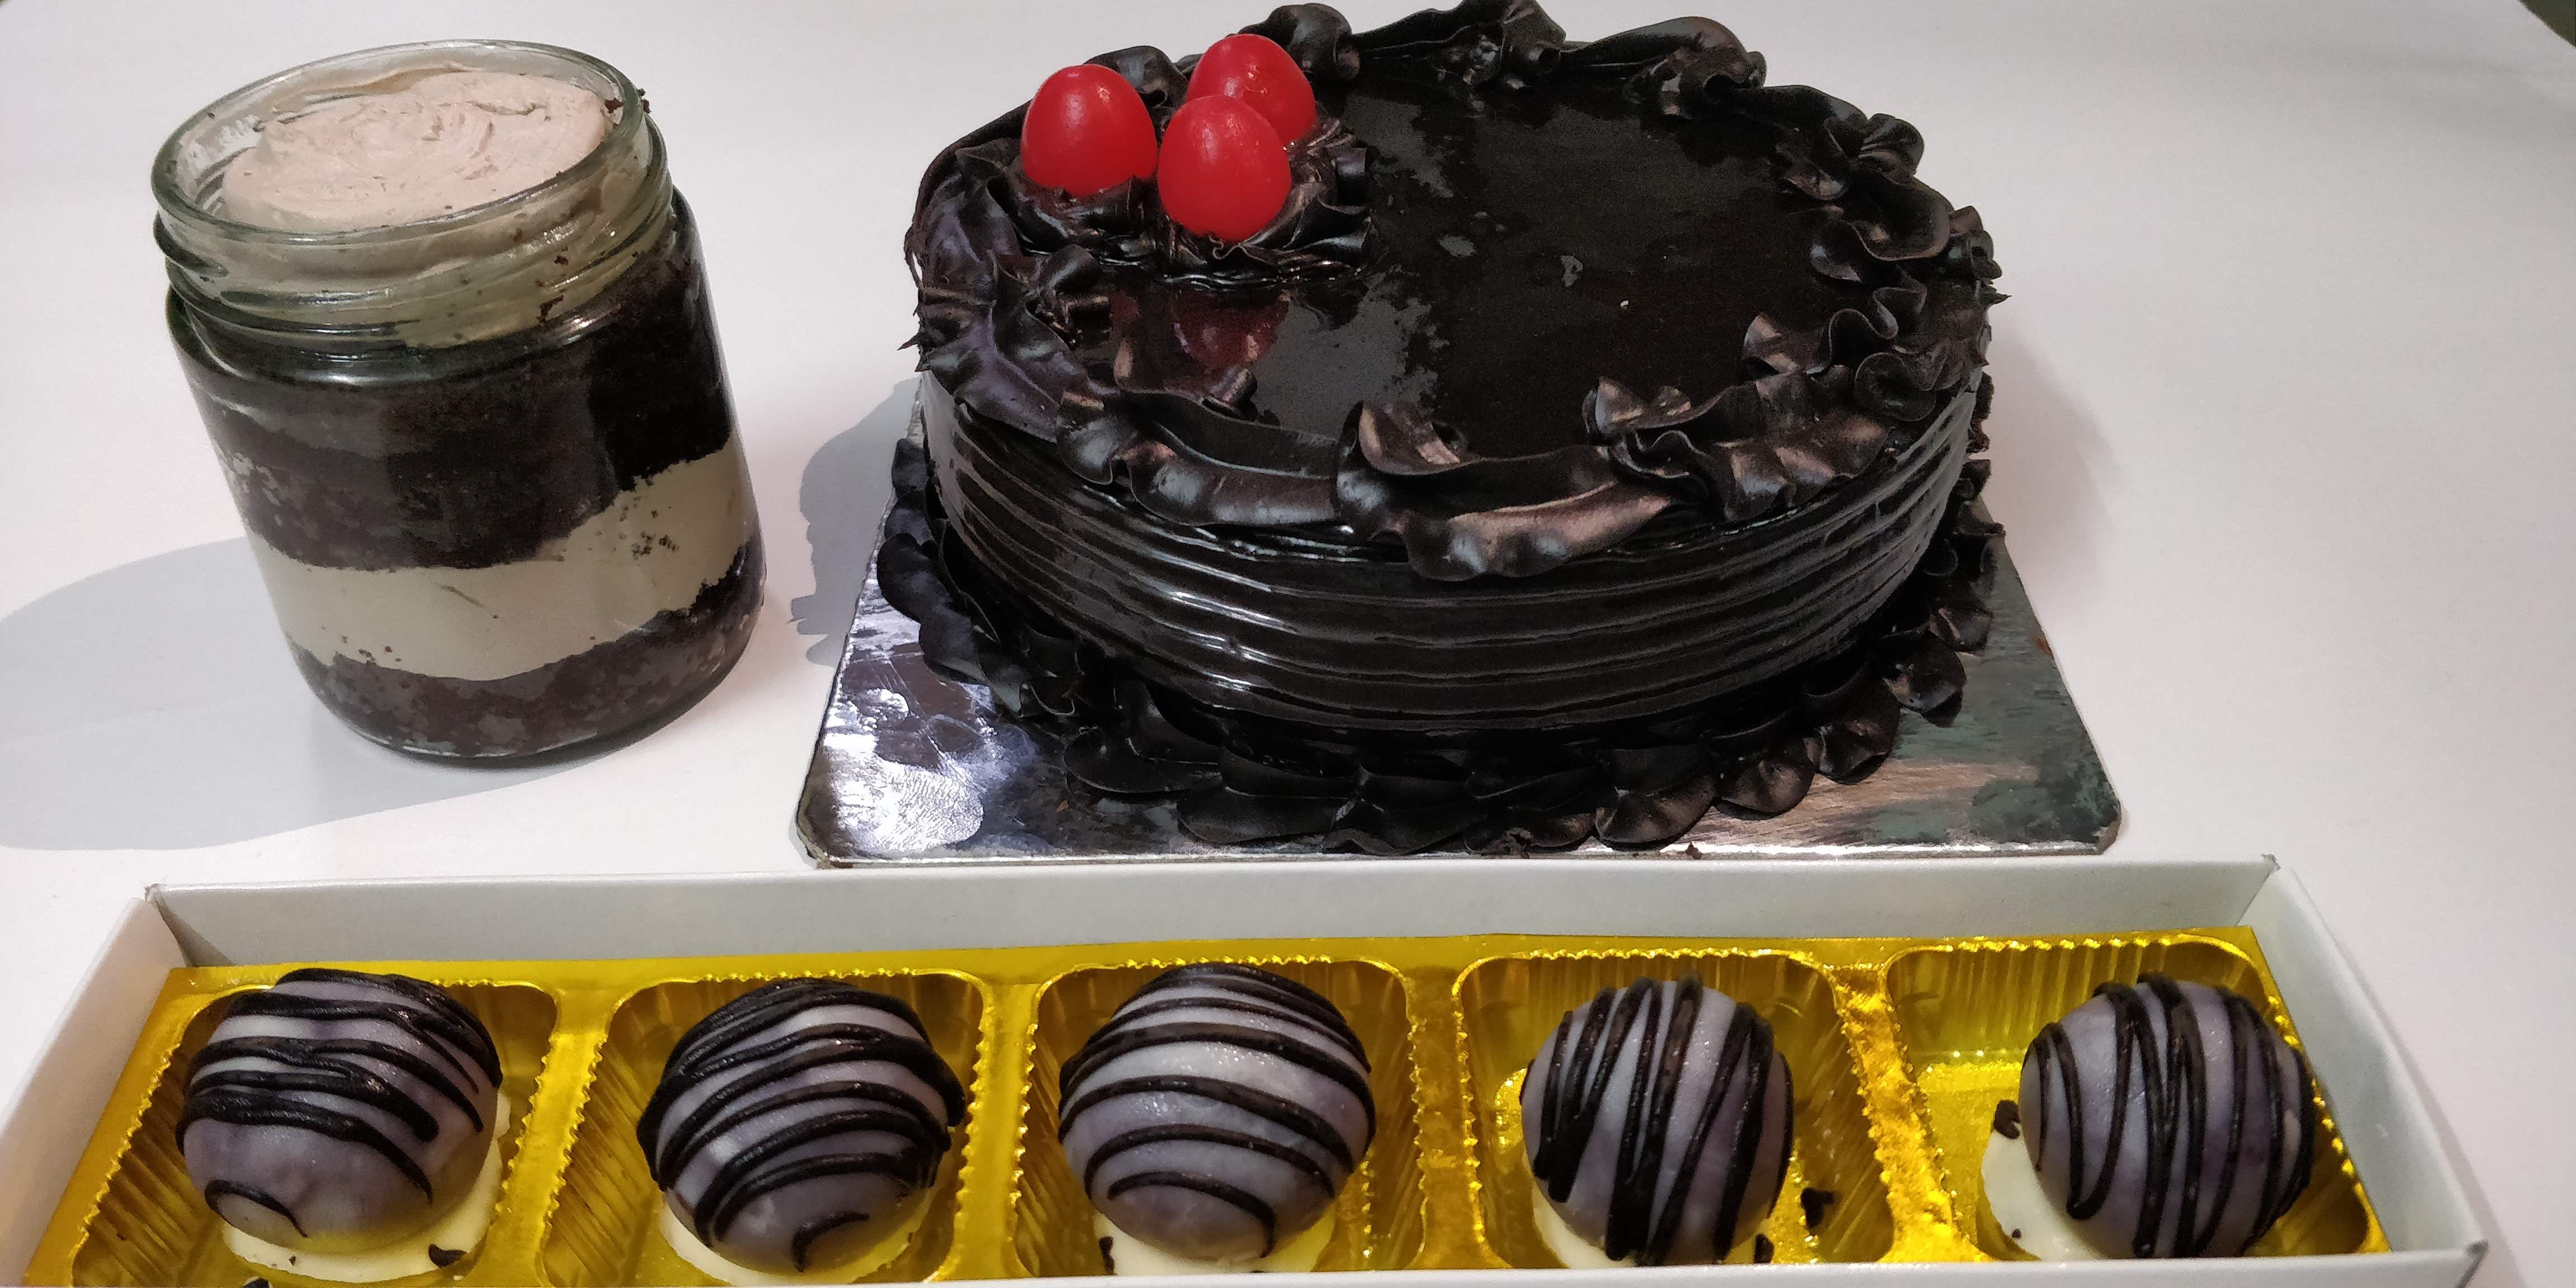 WarmOven | Cakes & Desserts Home Delivered (@warmovenindia) • Instagram  photos and videos